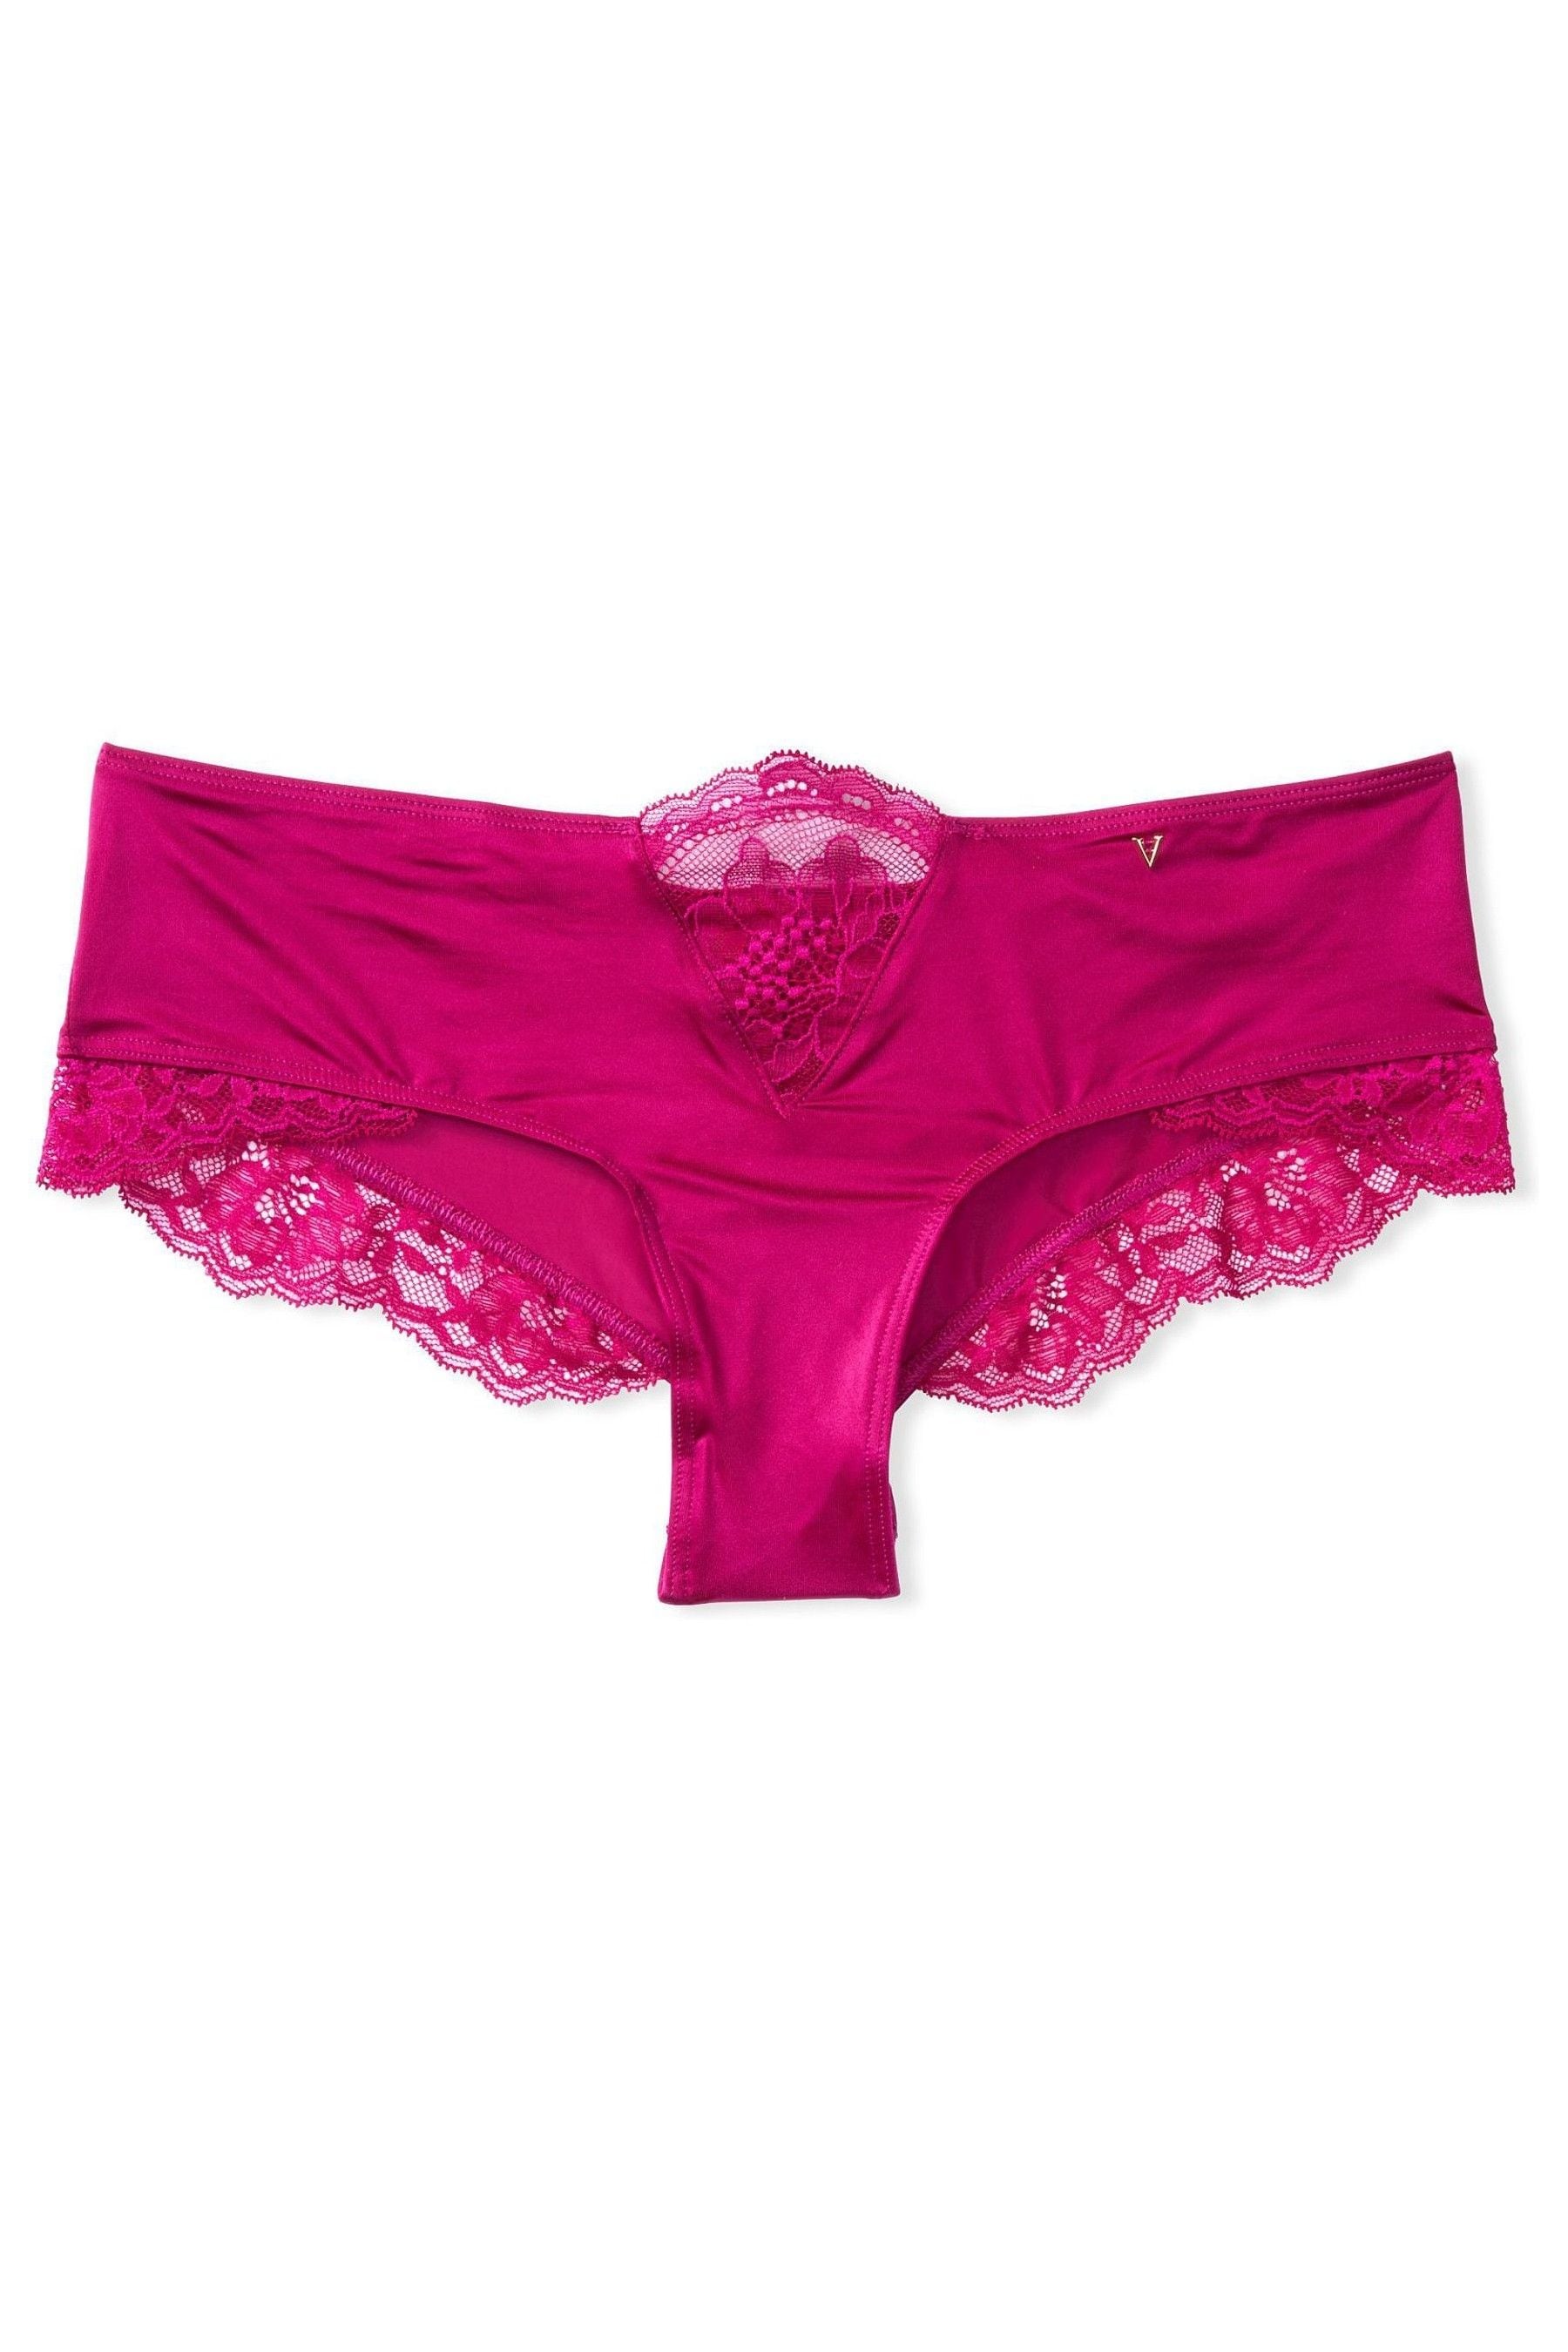 Buy Victoria's Secret Micro Lace Insert Cheeky Panty from the Victoria ...